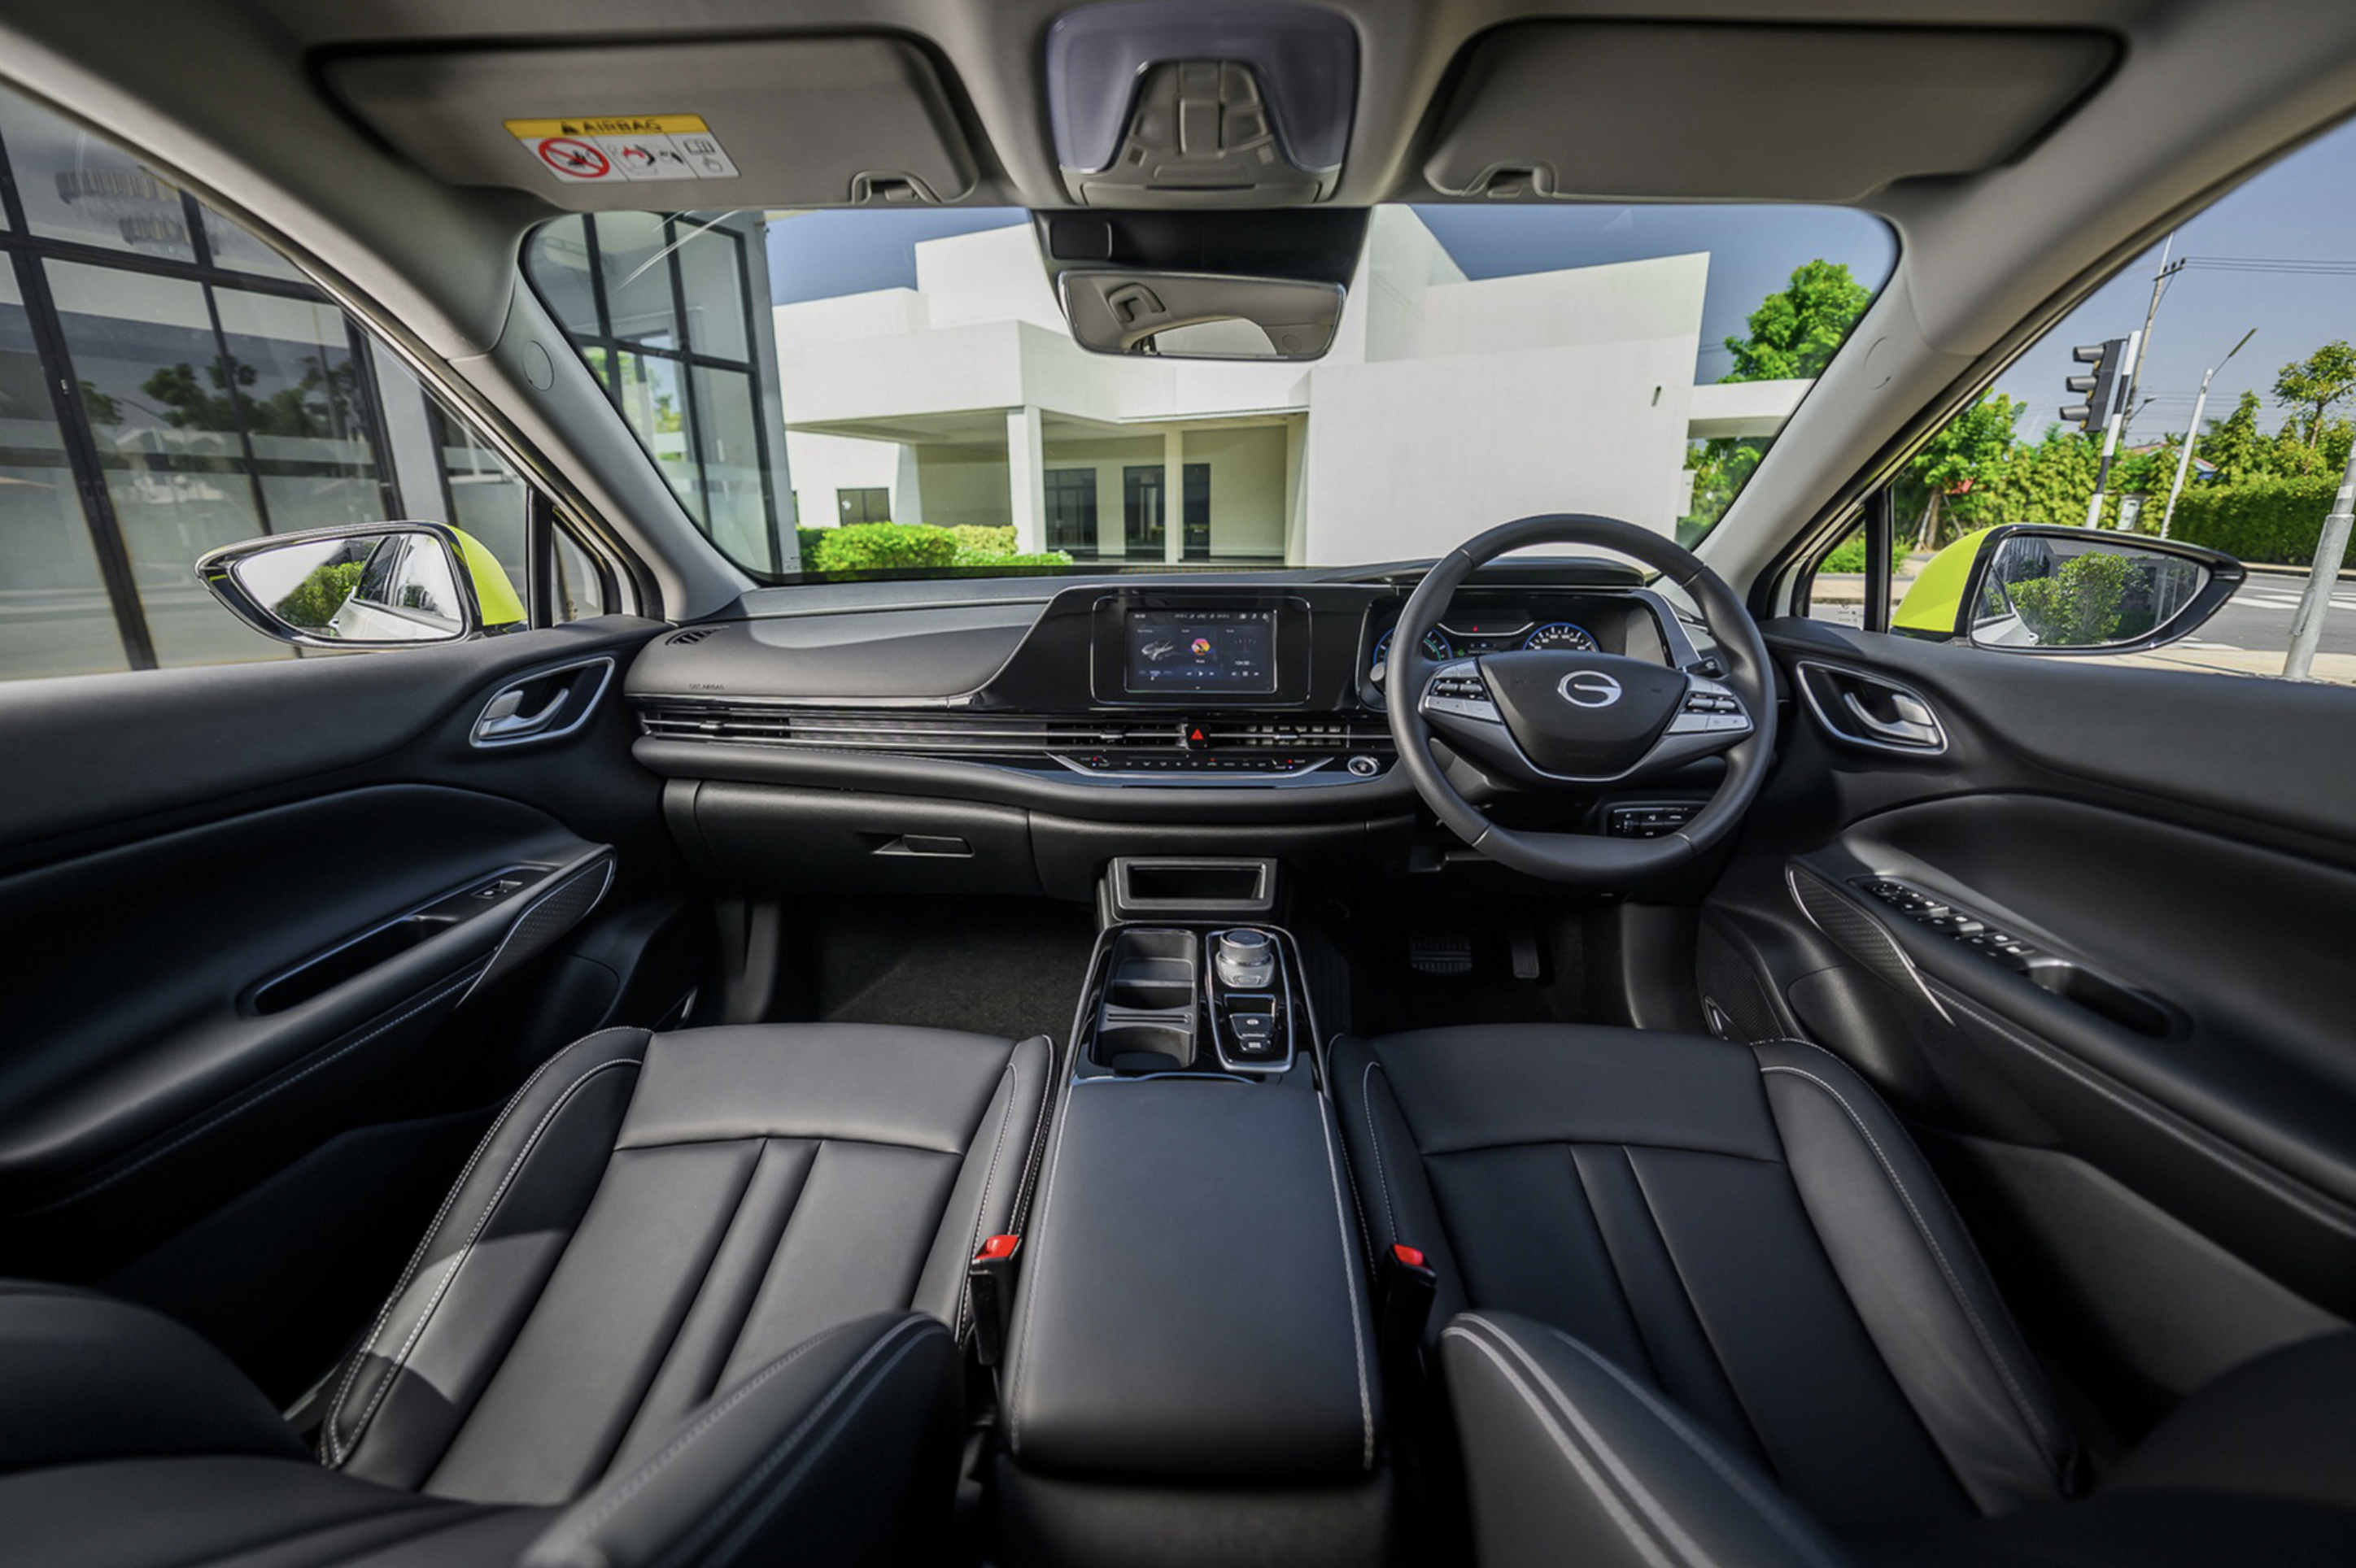 The Aion ES features a small touch screen, an automated parking brake and automatic air conditioning. Photo: AION